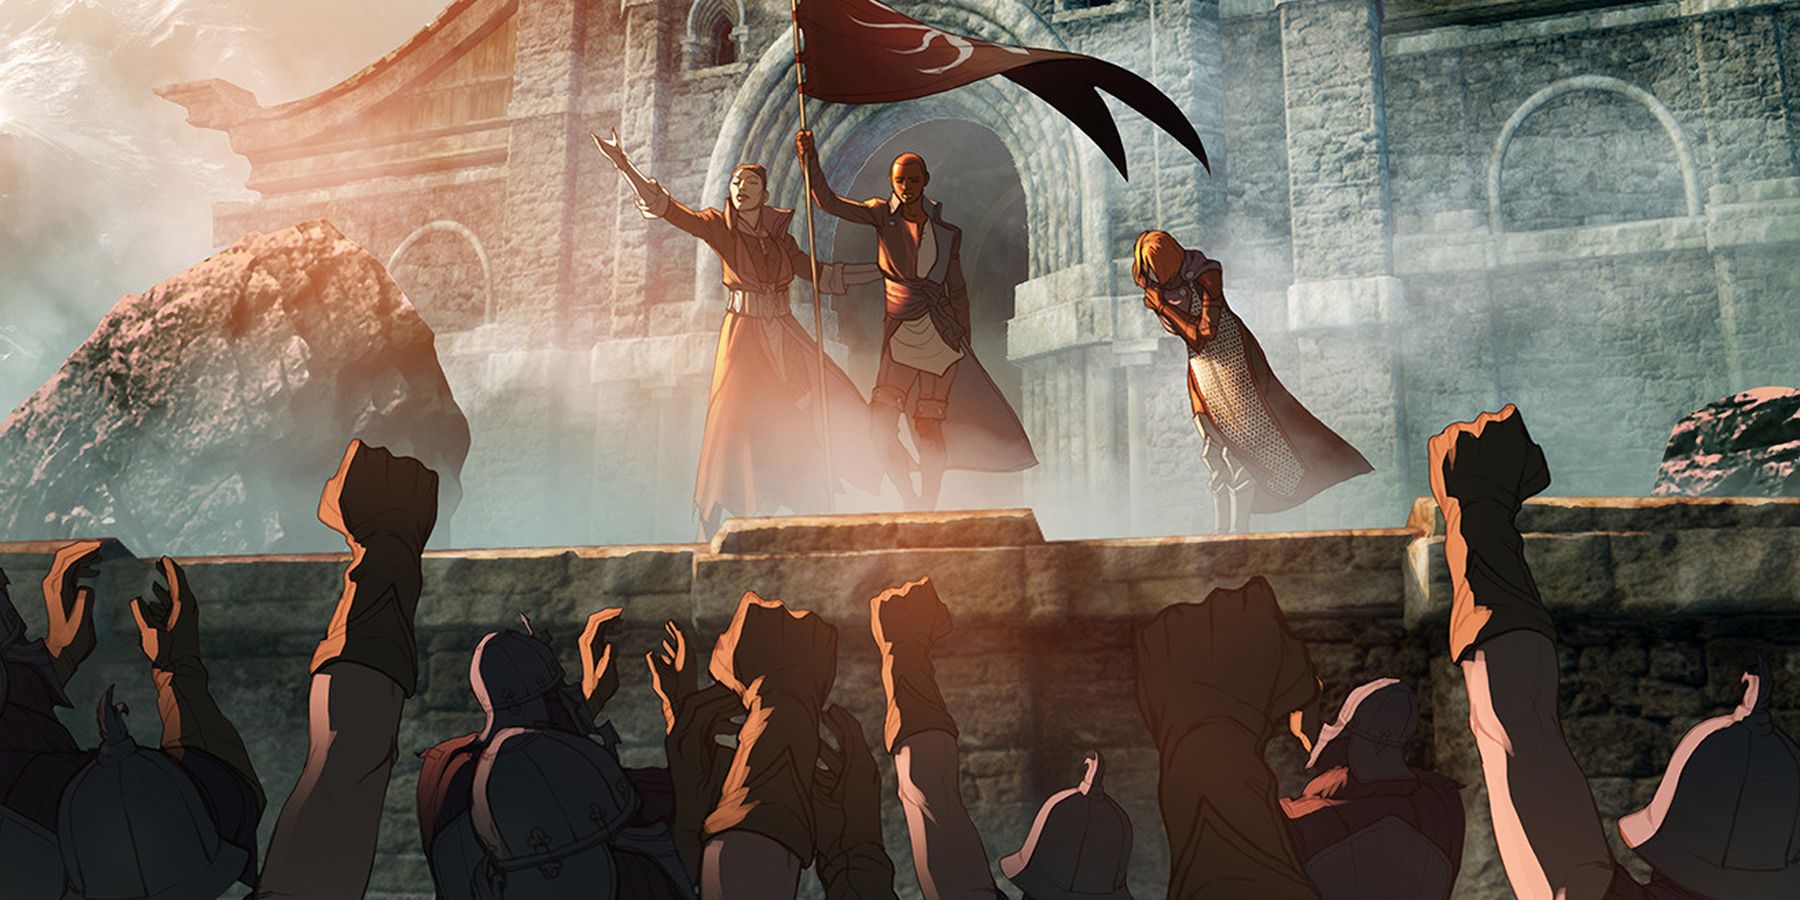 Dragon Age: Inquisition Inquisitor, Cassandra and Leliana Haven consept art